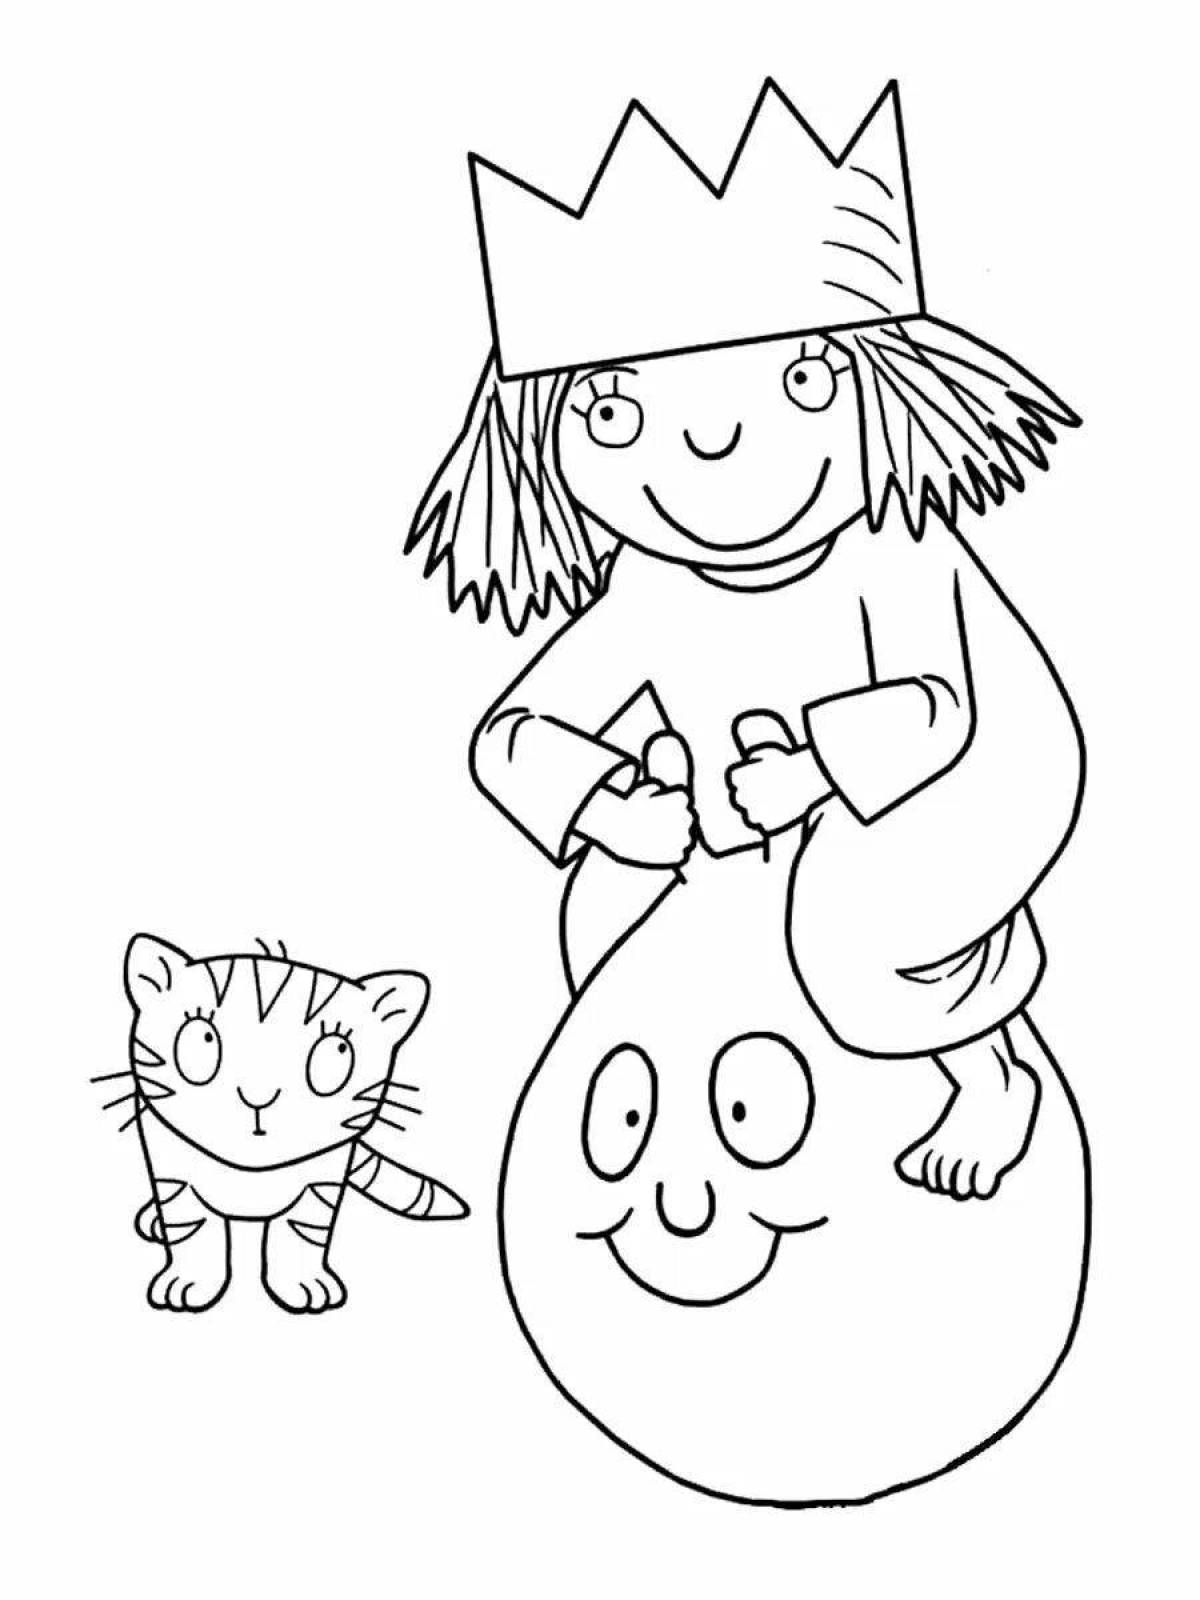 Coloring pages by themselves